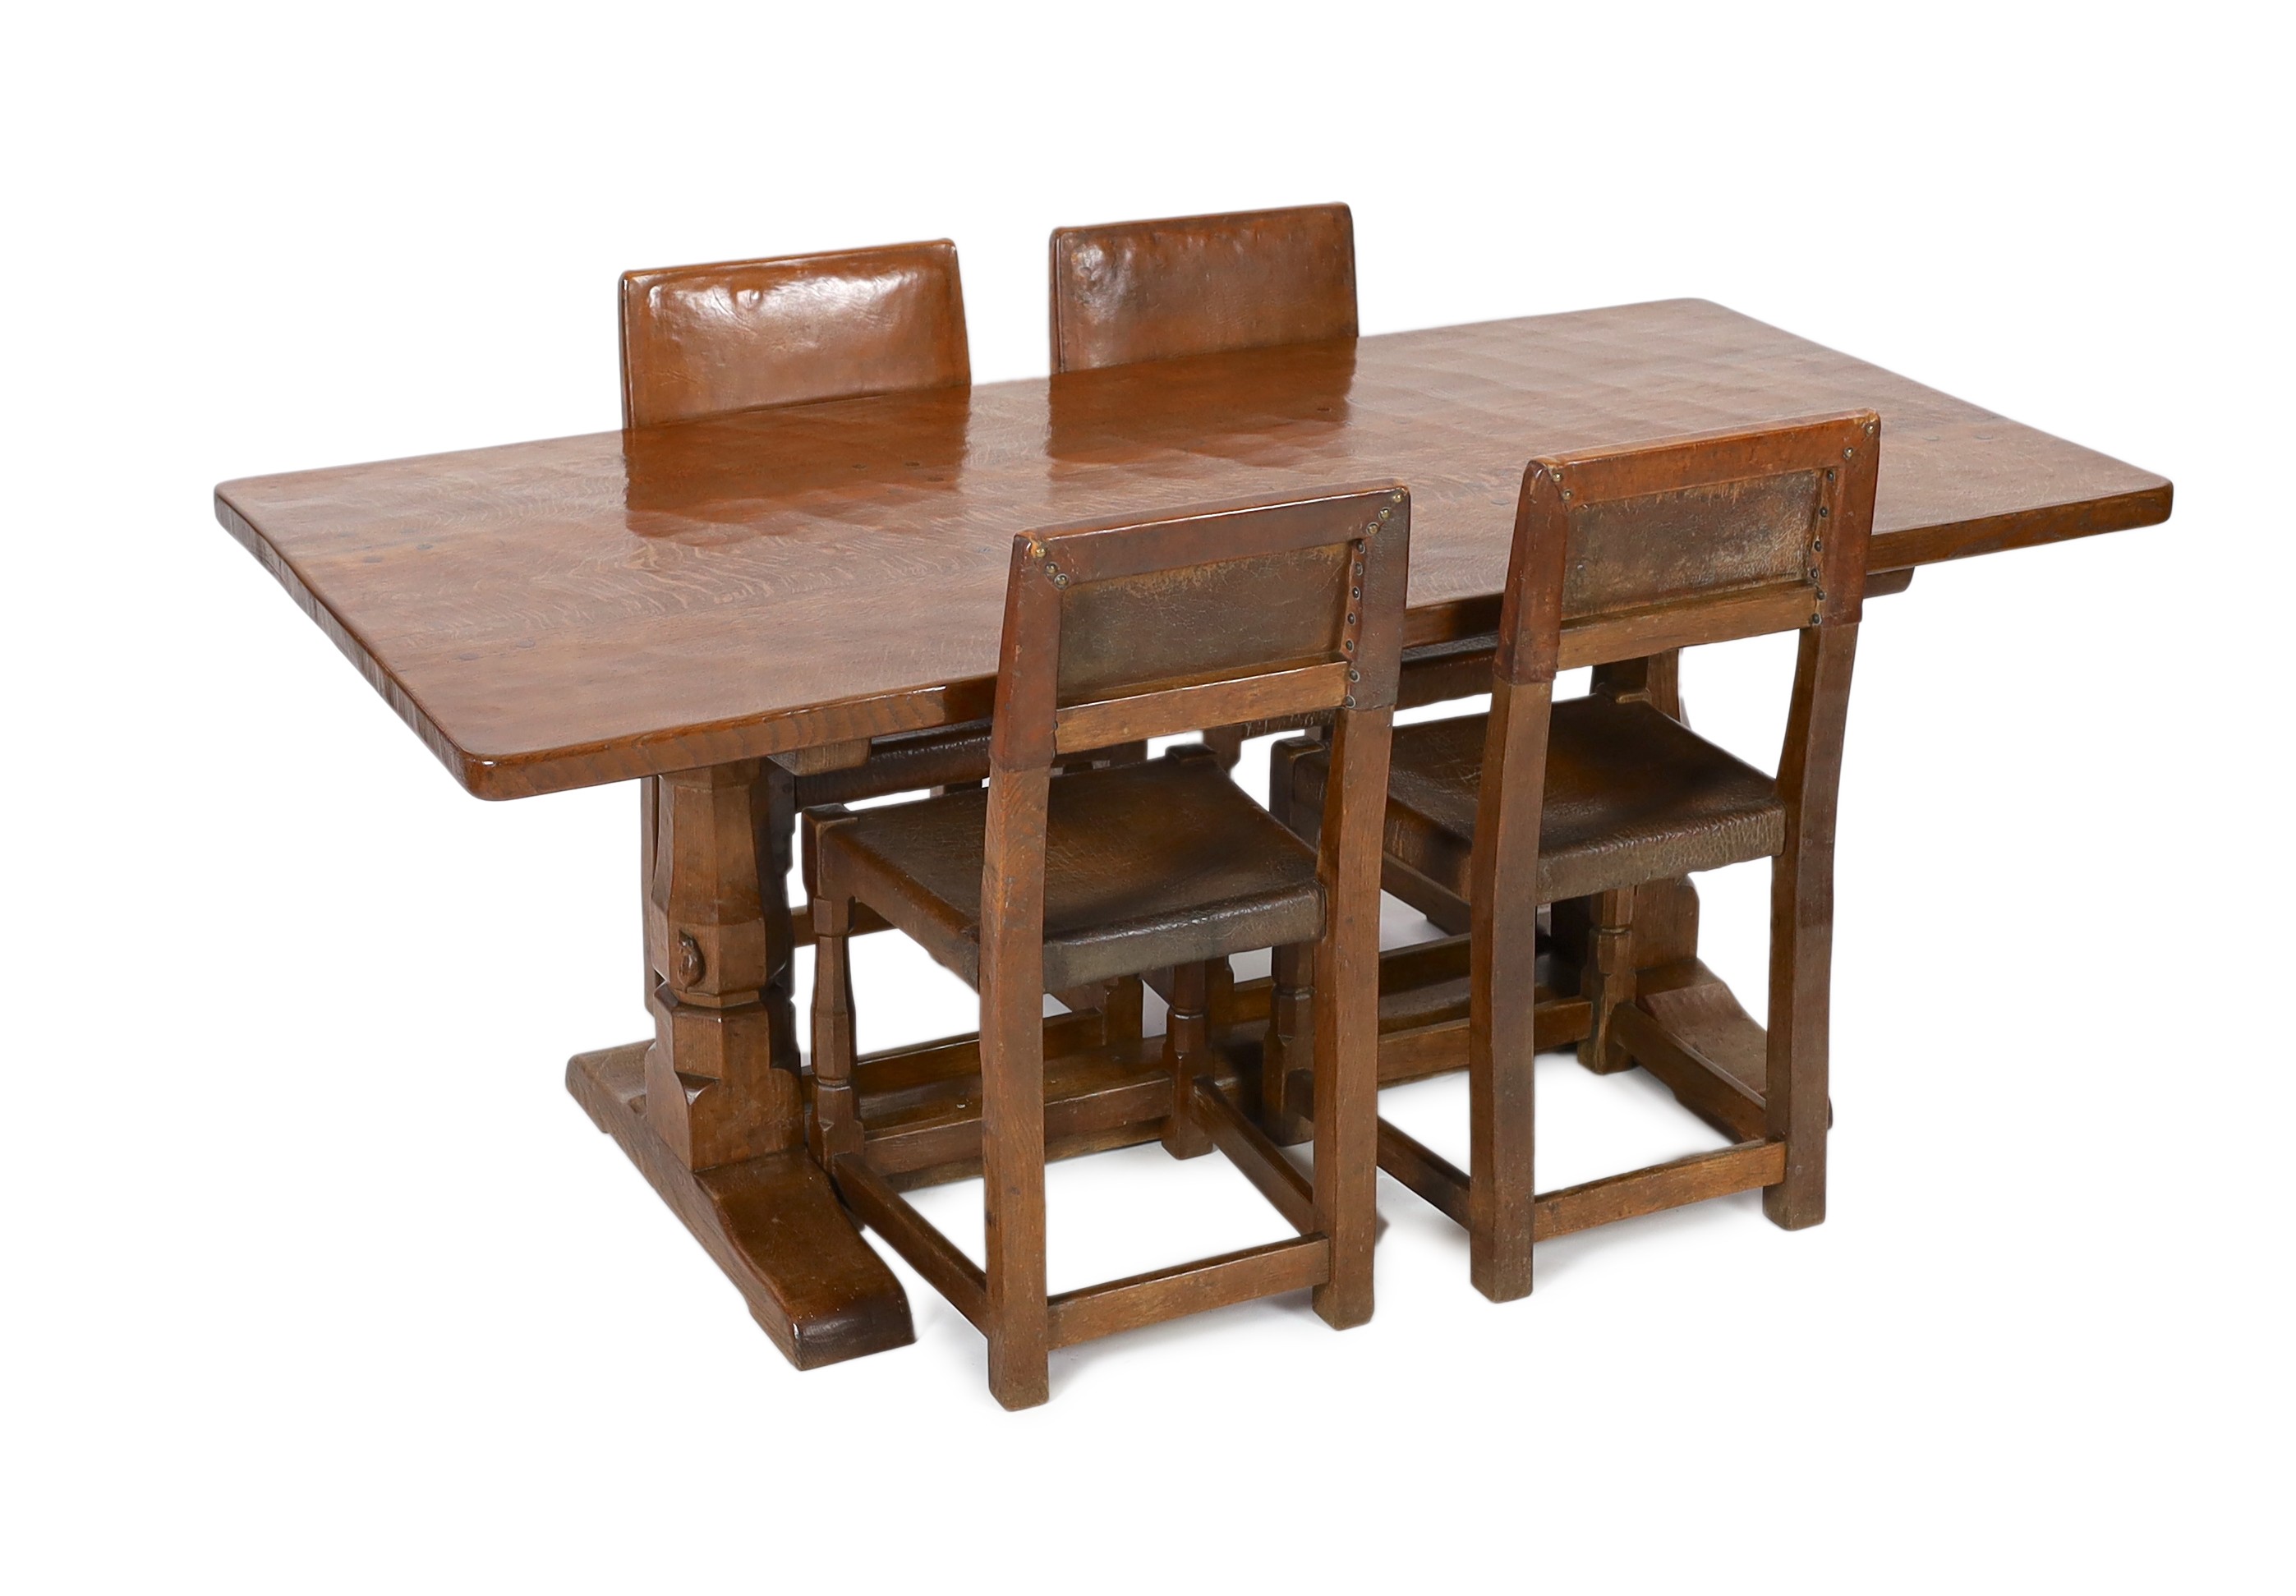 Robert Thompson of Kilburn. A Mouseman oak refectory table and four matching dining chairs, chairs width 44cm depth 47cm height 87cm